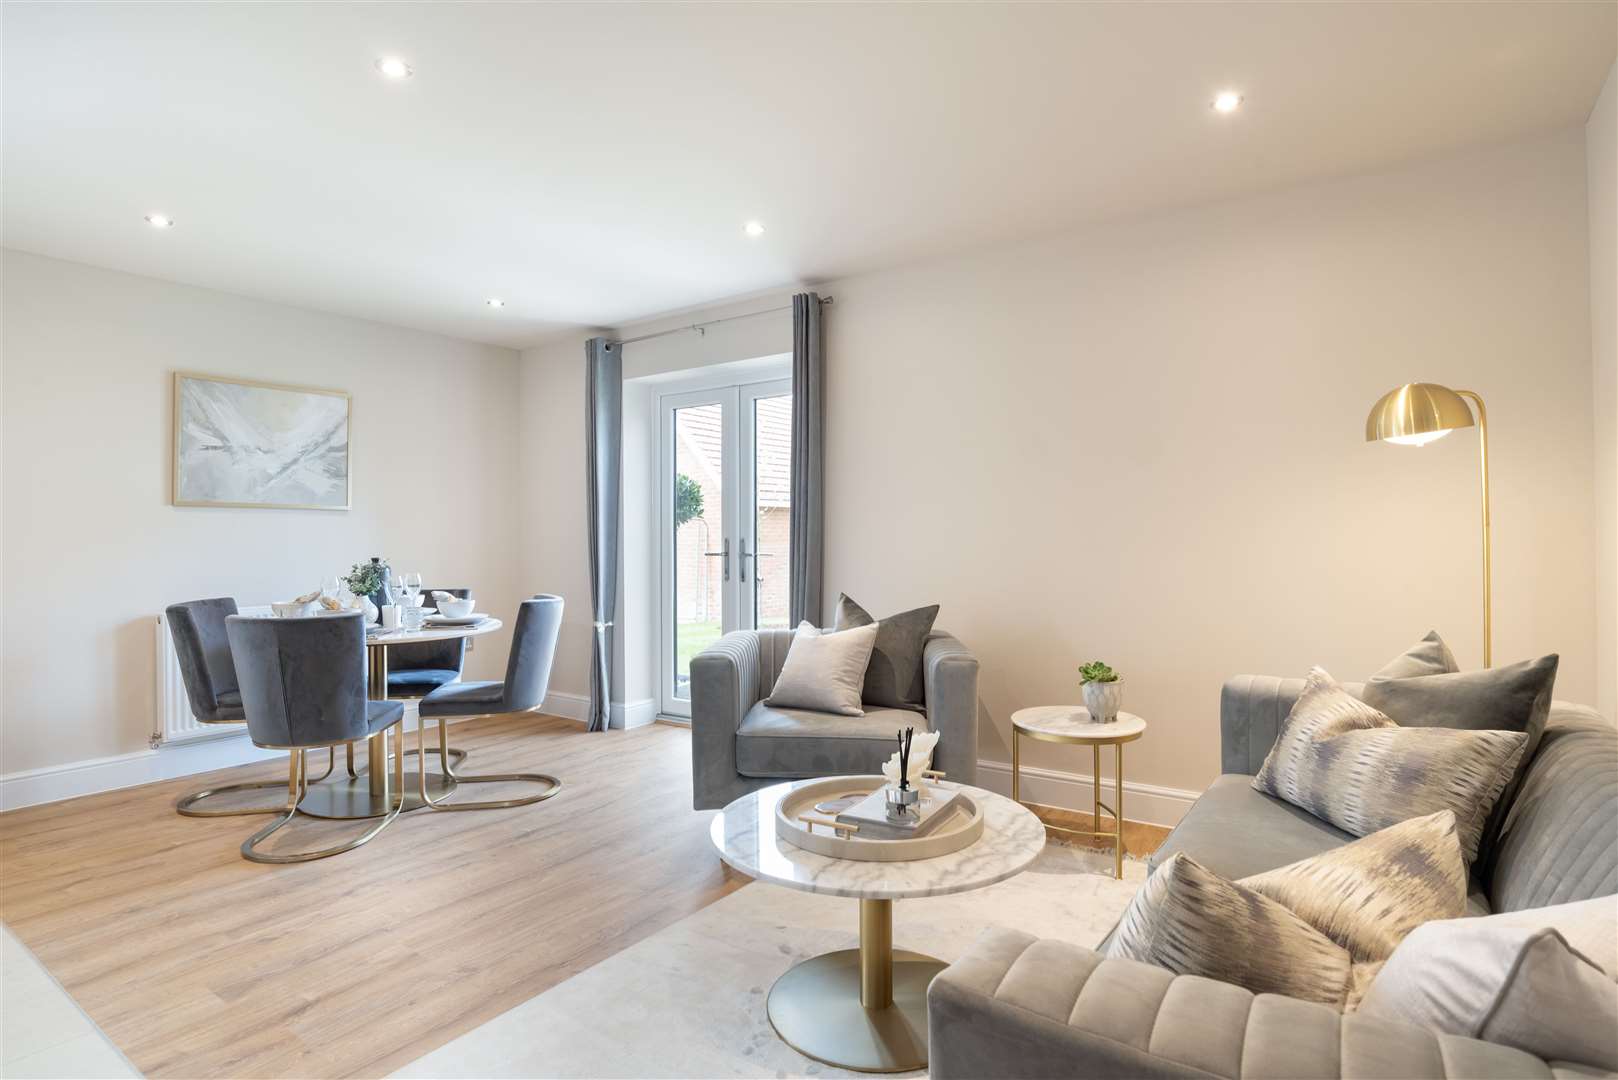 Eddington Park is a collection of stunning one, two and three-bedroom new apartments in Herne Bay